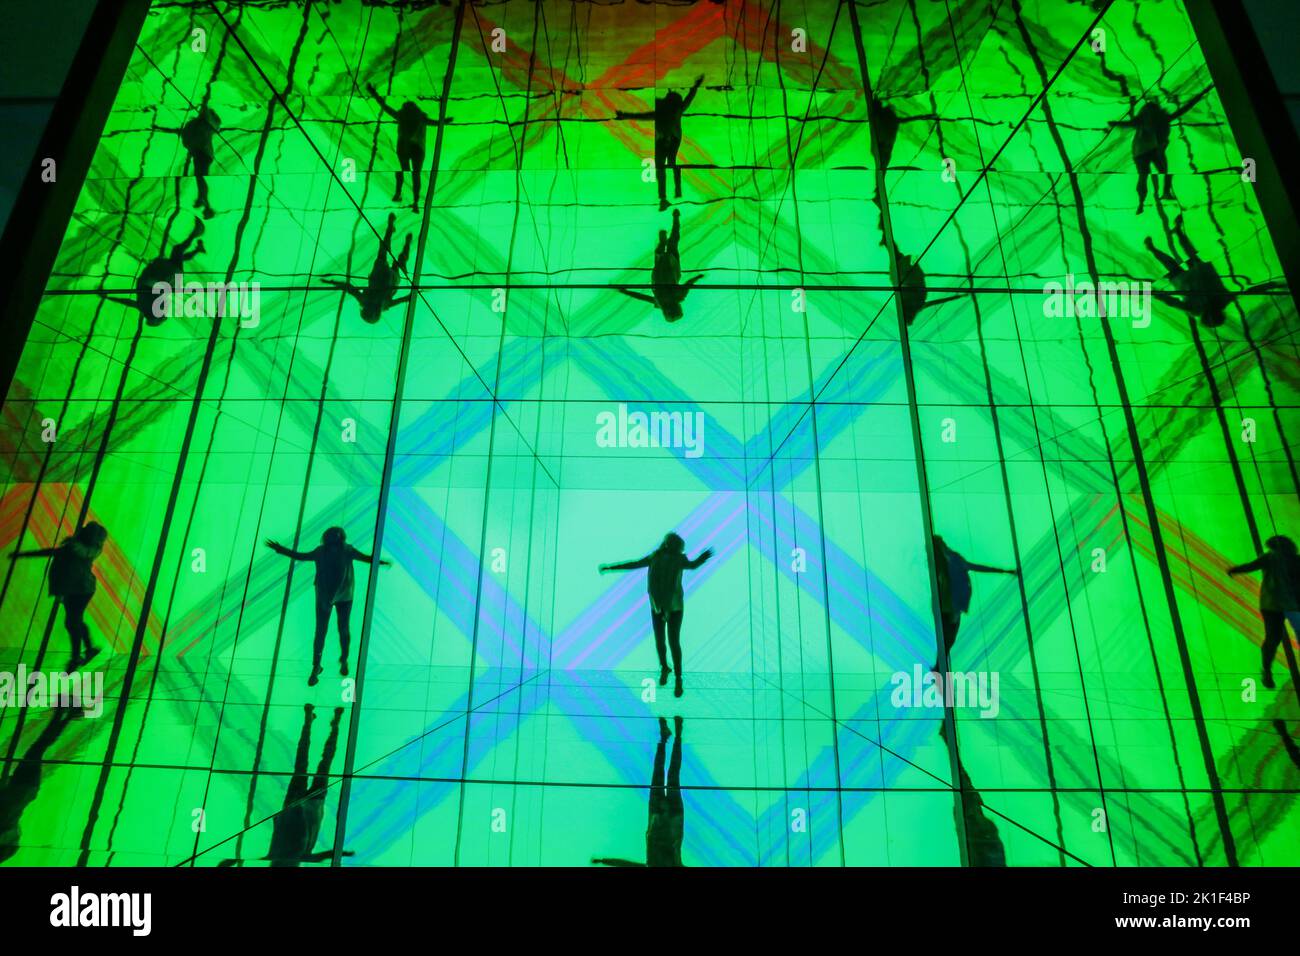 London UK 18 Sep. 2022 Members of staff pose with the installation INTO SIGHT, a large-scale installation by Sony Design, LED display systems are used alongside generative sound, see-through glass walls and mirrors combining Sony's Crystal LED display systems, which recently replaced green screen technology in one of the biggest developments in film production, with generative sound, see-through glass walls and mirrors.Paul Quezada-Neiman/Alamy Live News Stock Photo